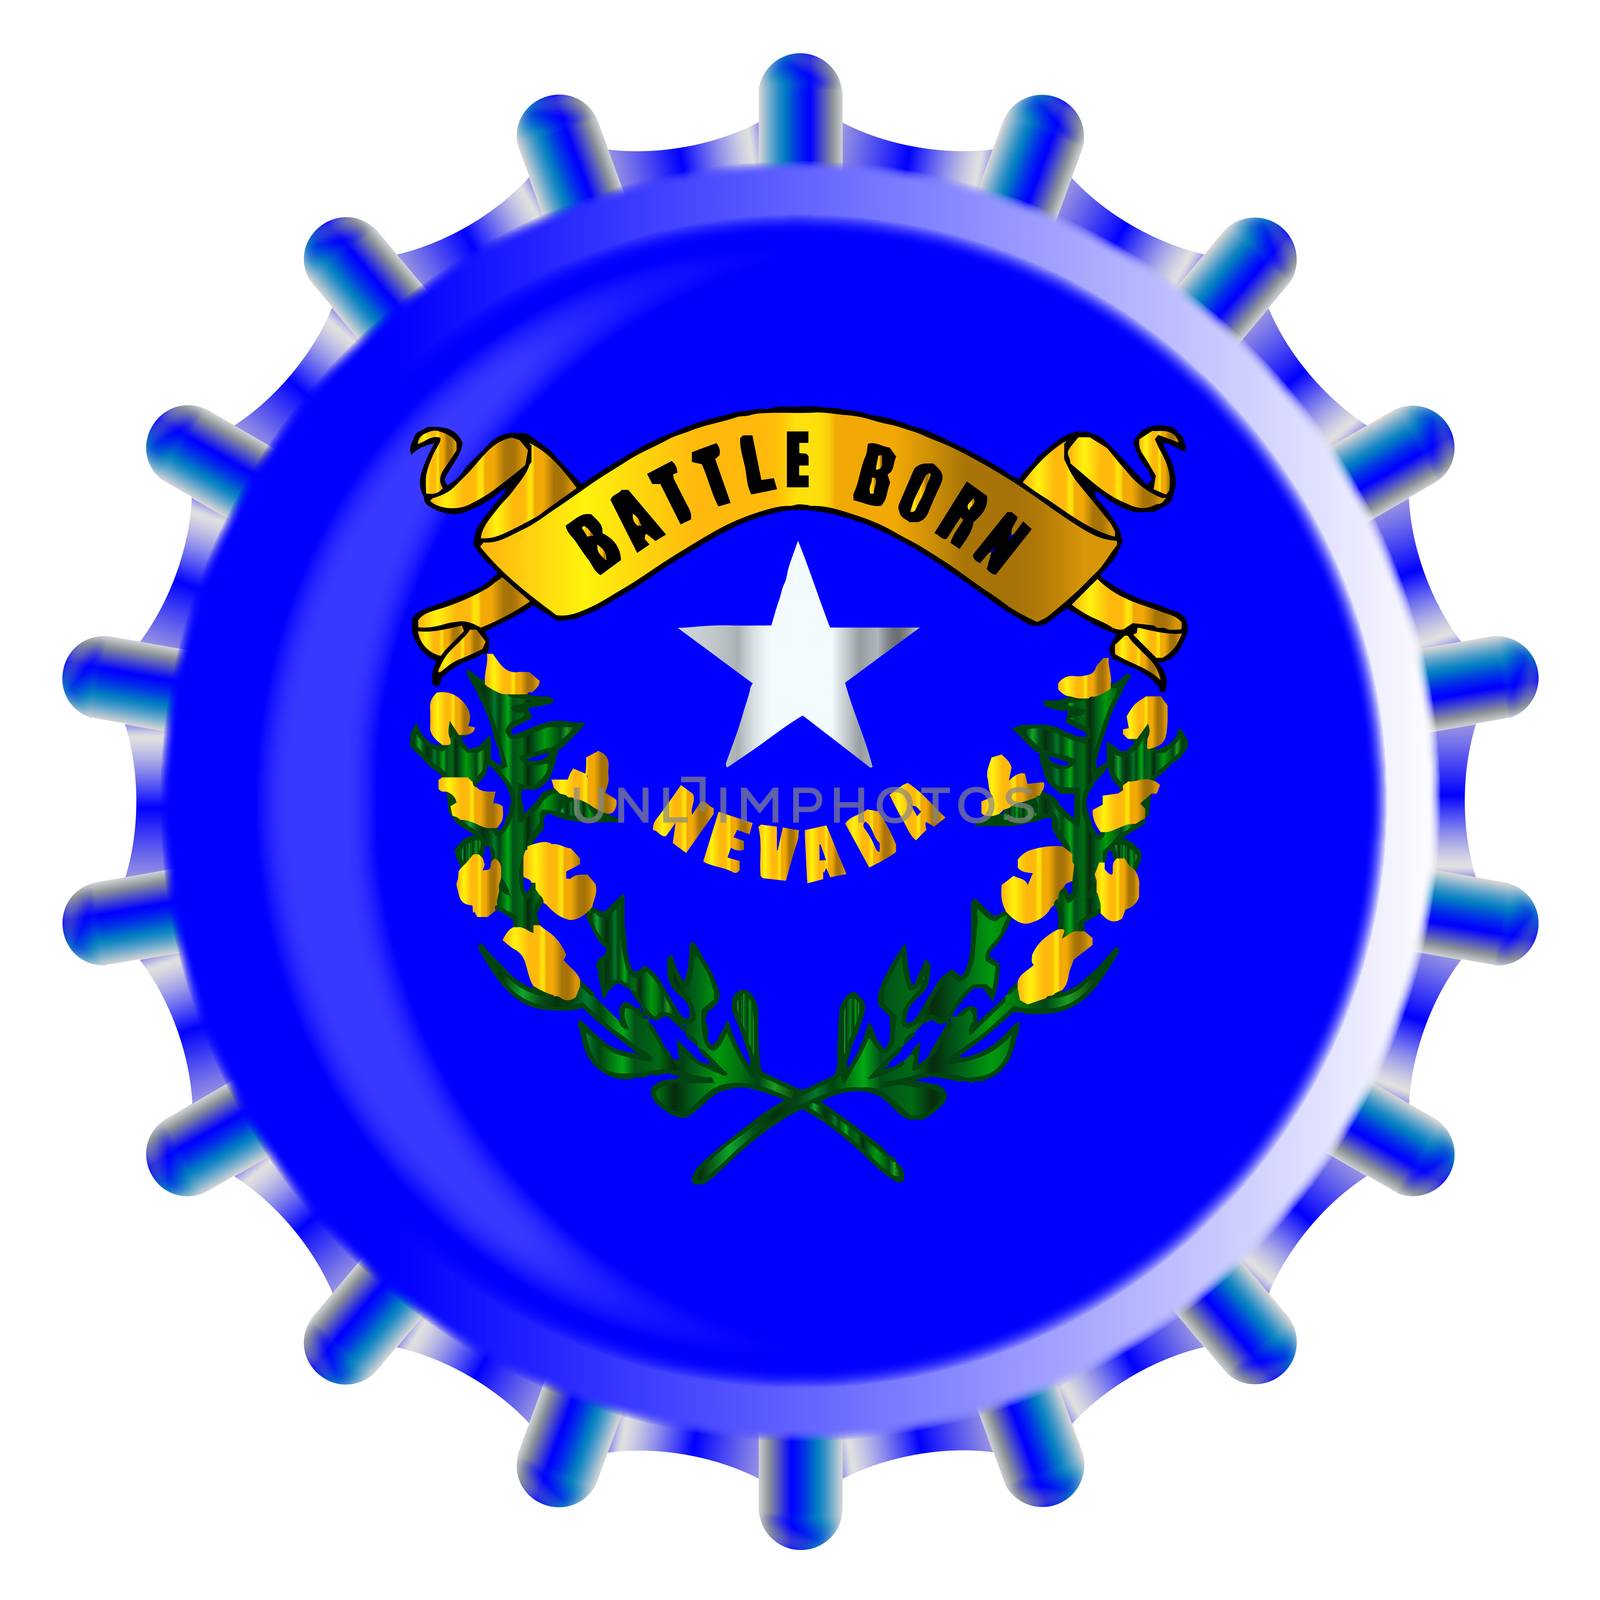 A typical metal glass bottle cap in Nevada state flag colors isolated on a white background